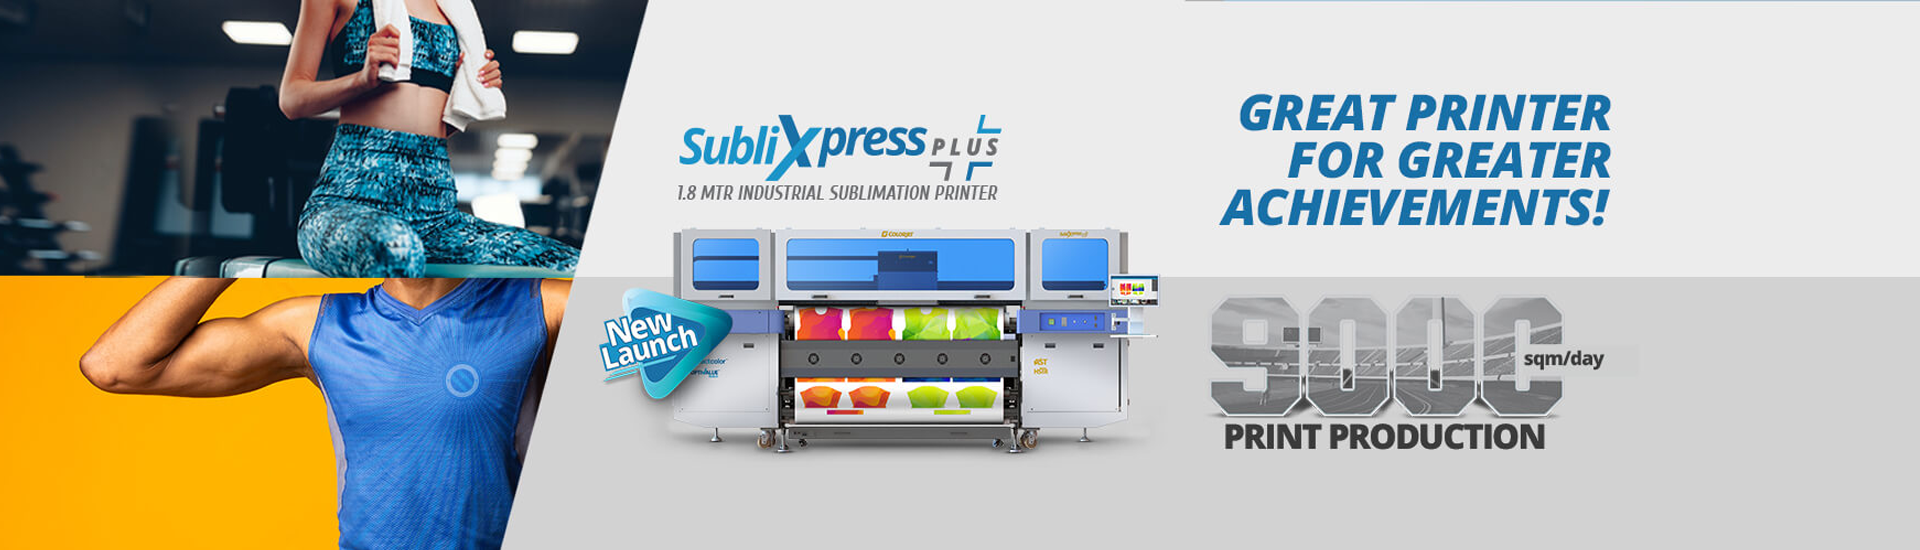 Sublixpress by ColorJET for super high speed dye sublimation printing